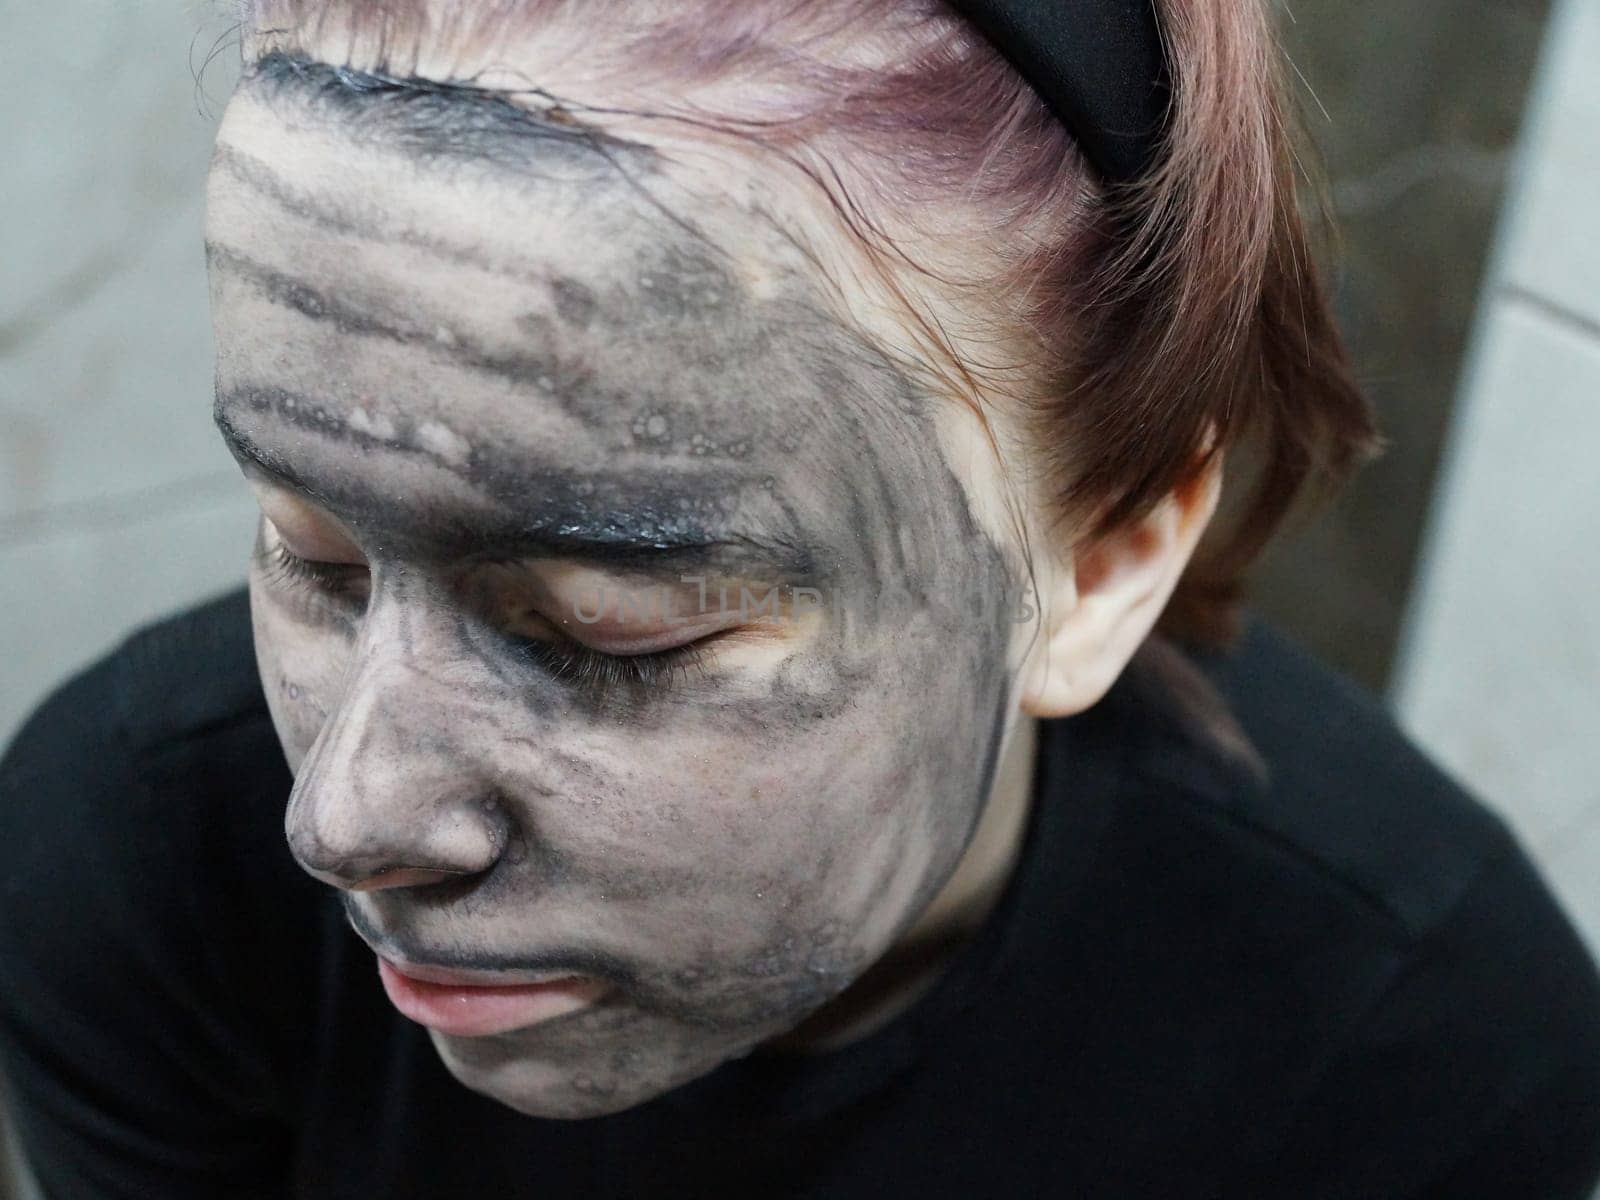 face of a teenage girl with a cleansing mud mask by Annado